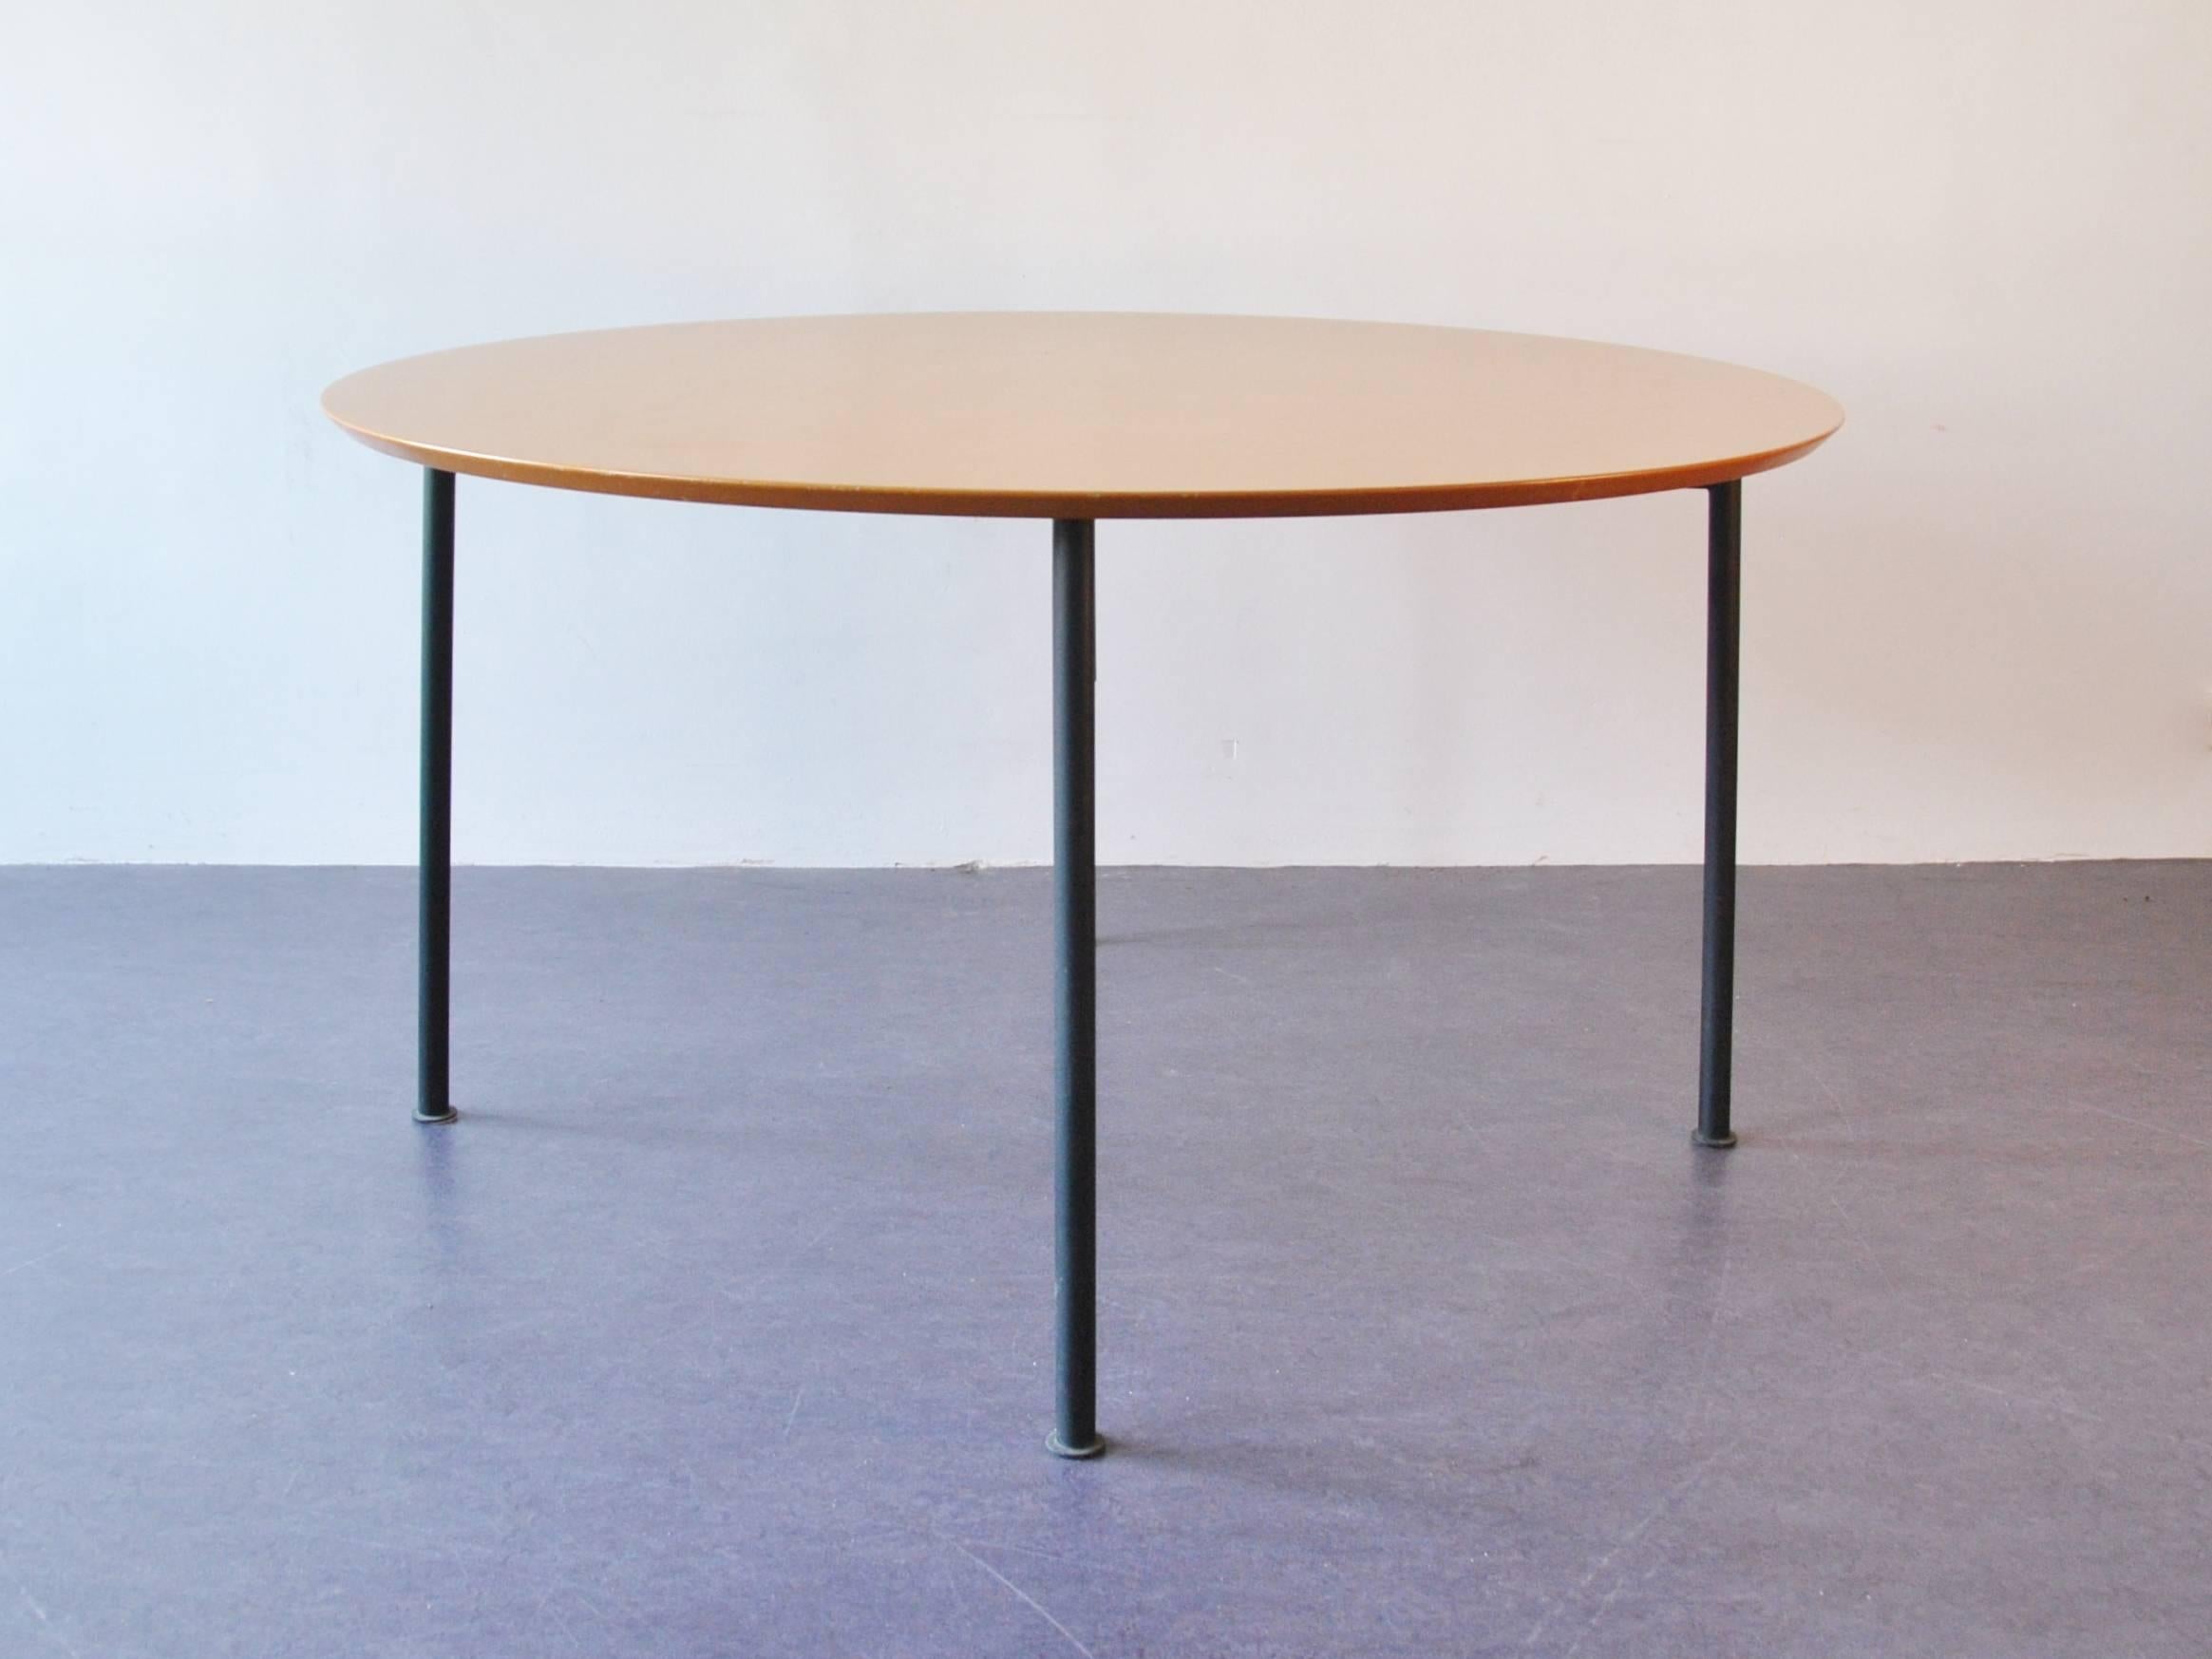 A 'Nina Freed' dining table by Philippe Starck from 1983. A rarely offered item and a true collector's item. The table is in a very good condition with some signs of age and use. The tabletop can easily be taken of and the lightweight base can be